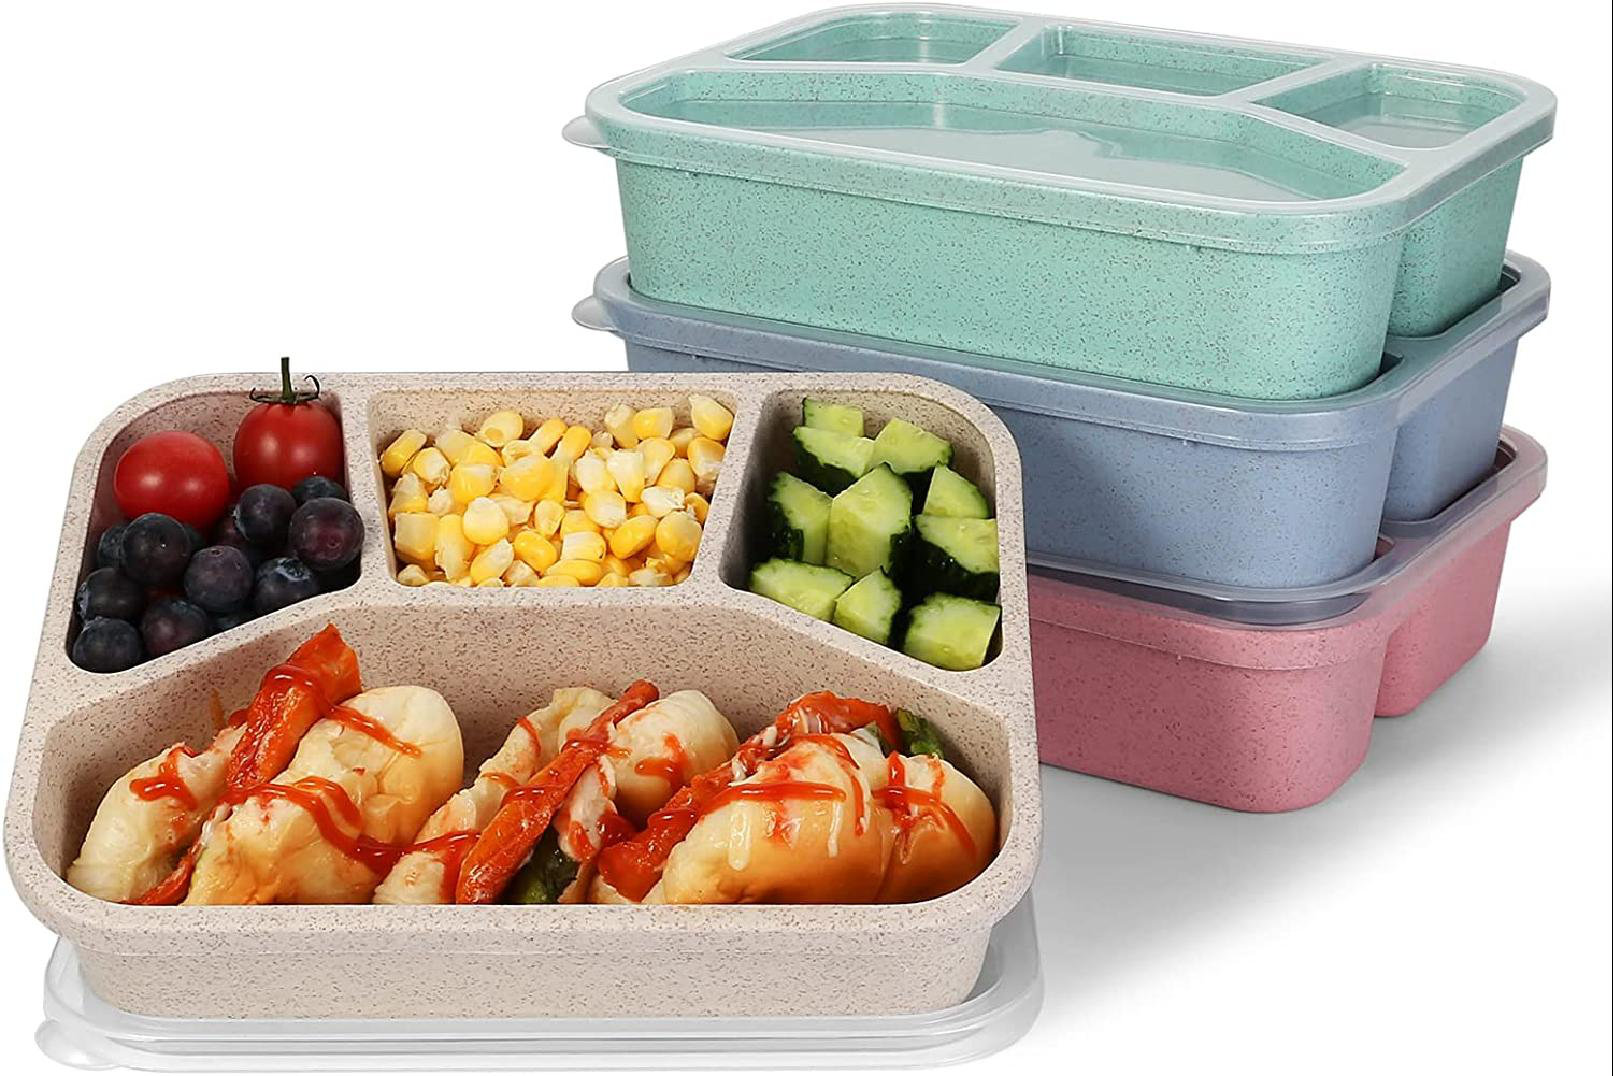 4-Compartment Snack Bento box,Party Platter, Reusable Food Containers for Kids and Adults,Meal Prep Container,Bento Lunch Boxes,Clear